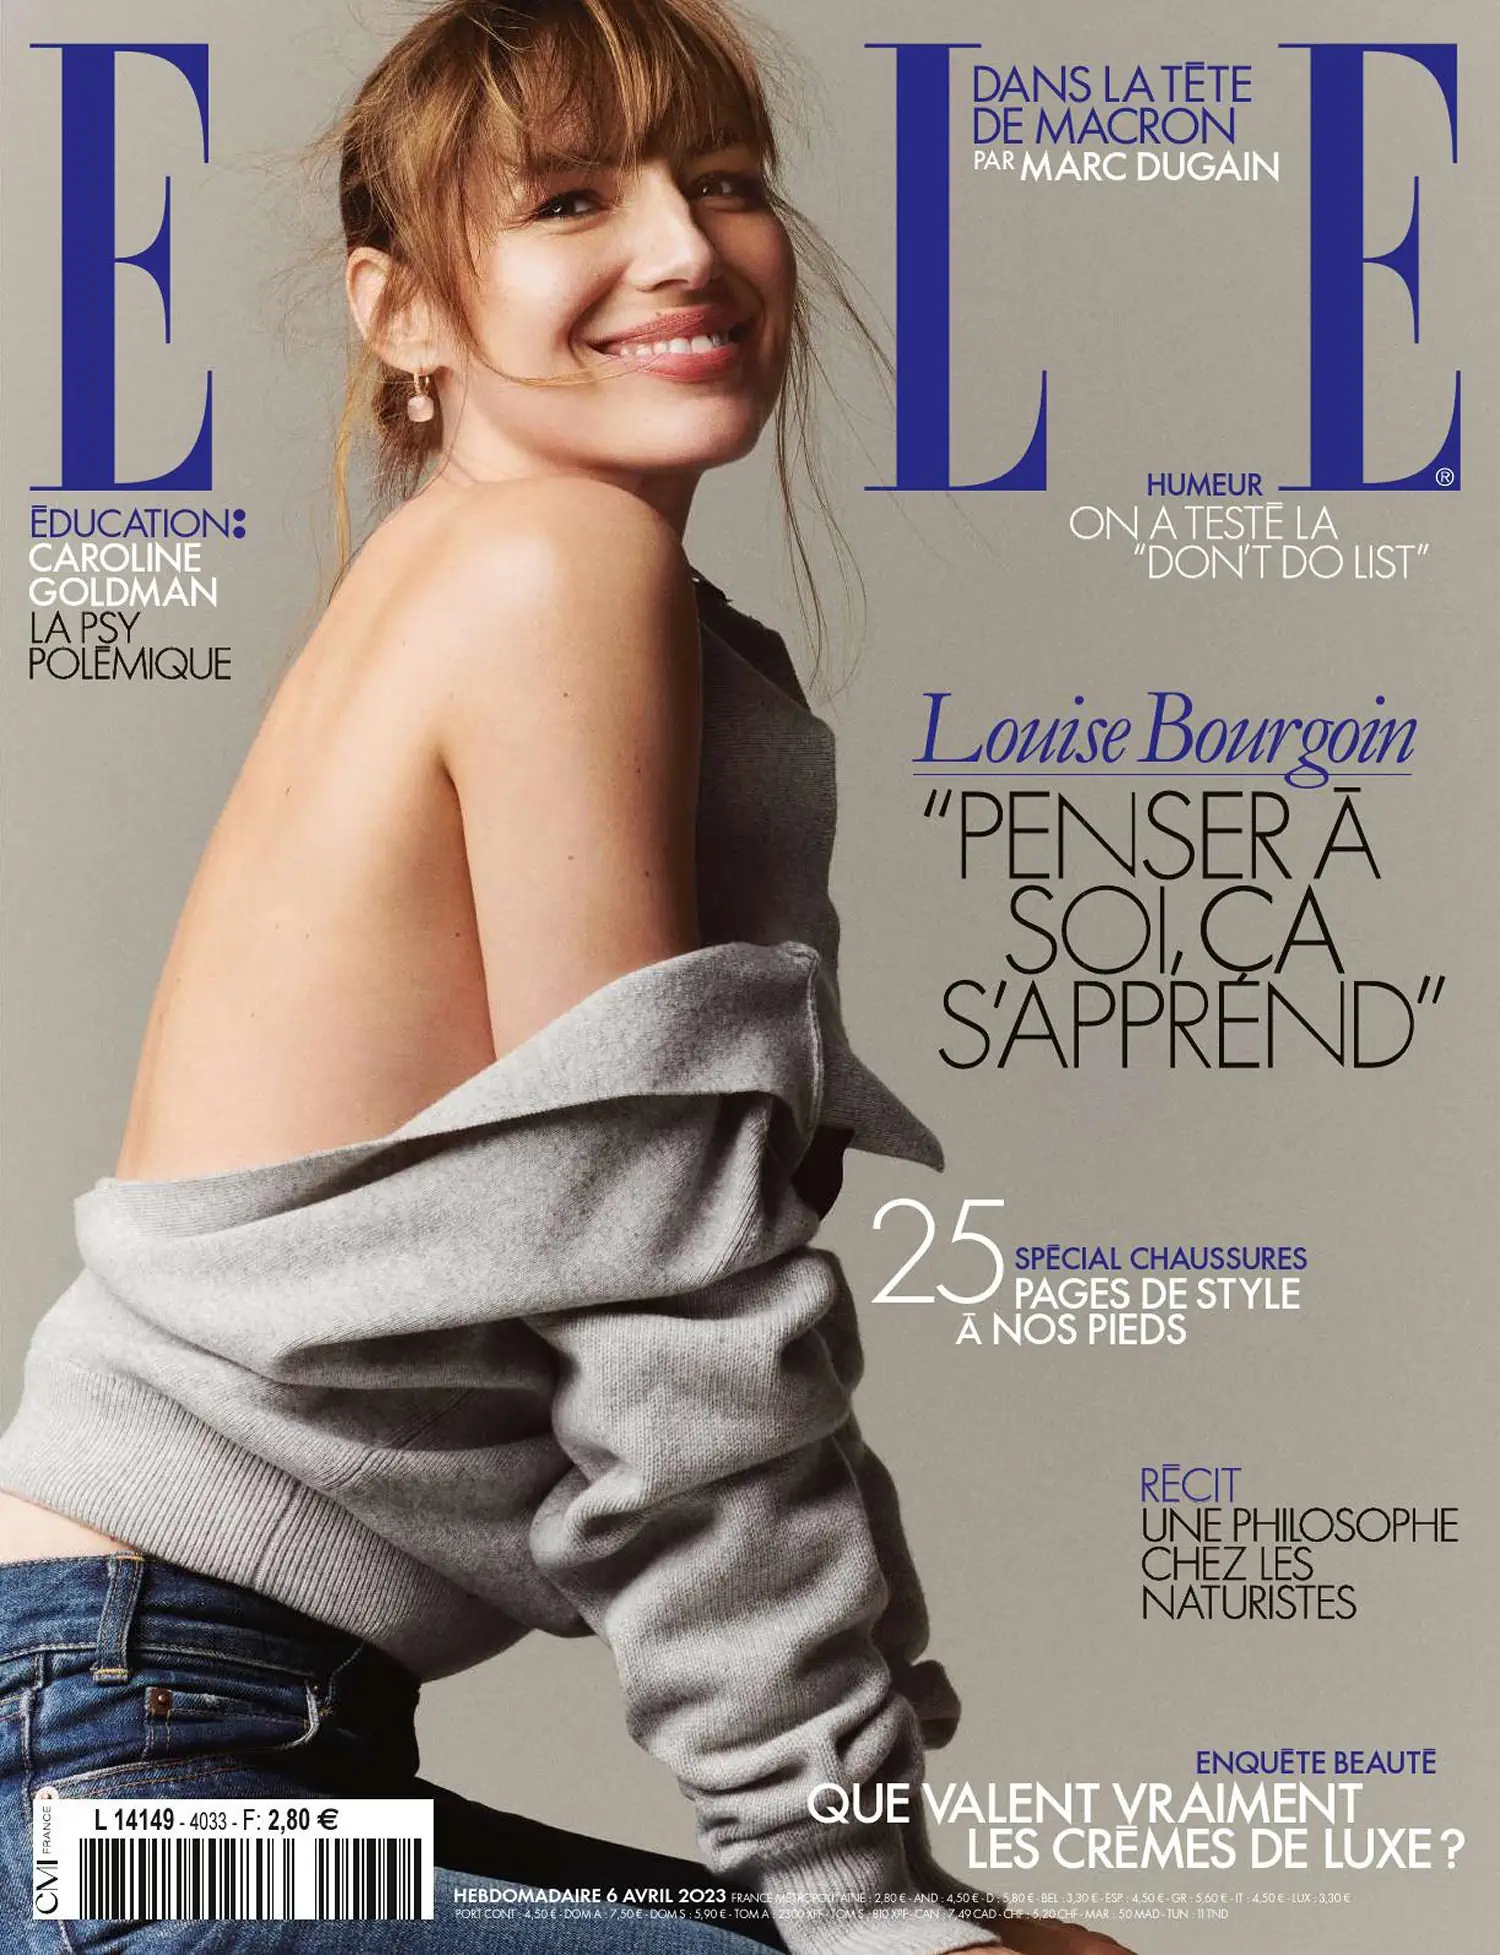 Louise Bourgoin covers Elle France April 6th, 2023 by Jonas Bresnan